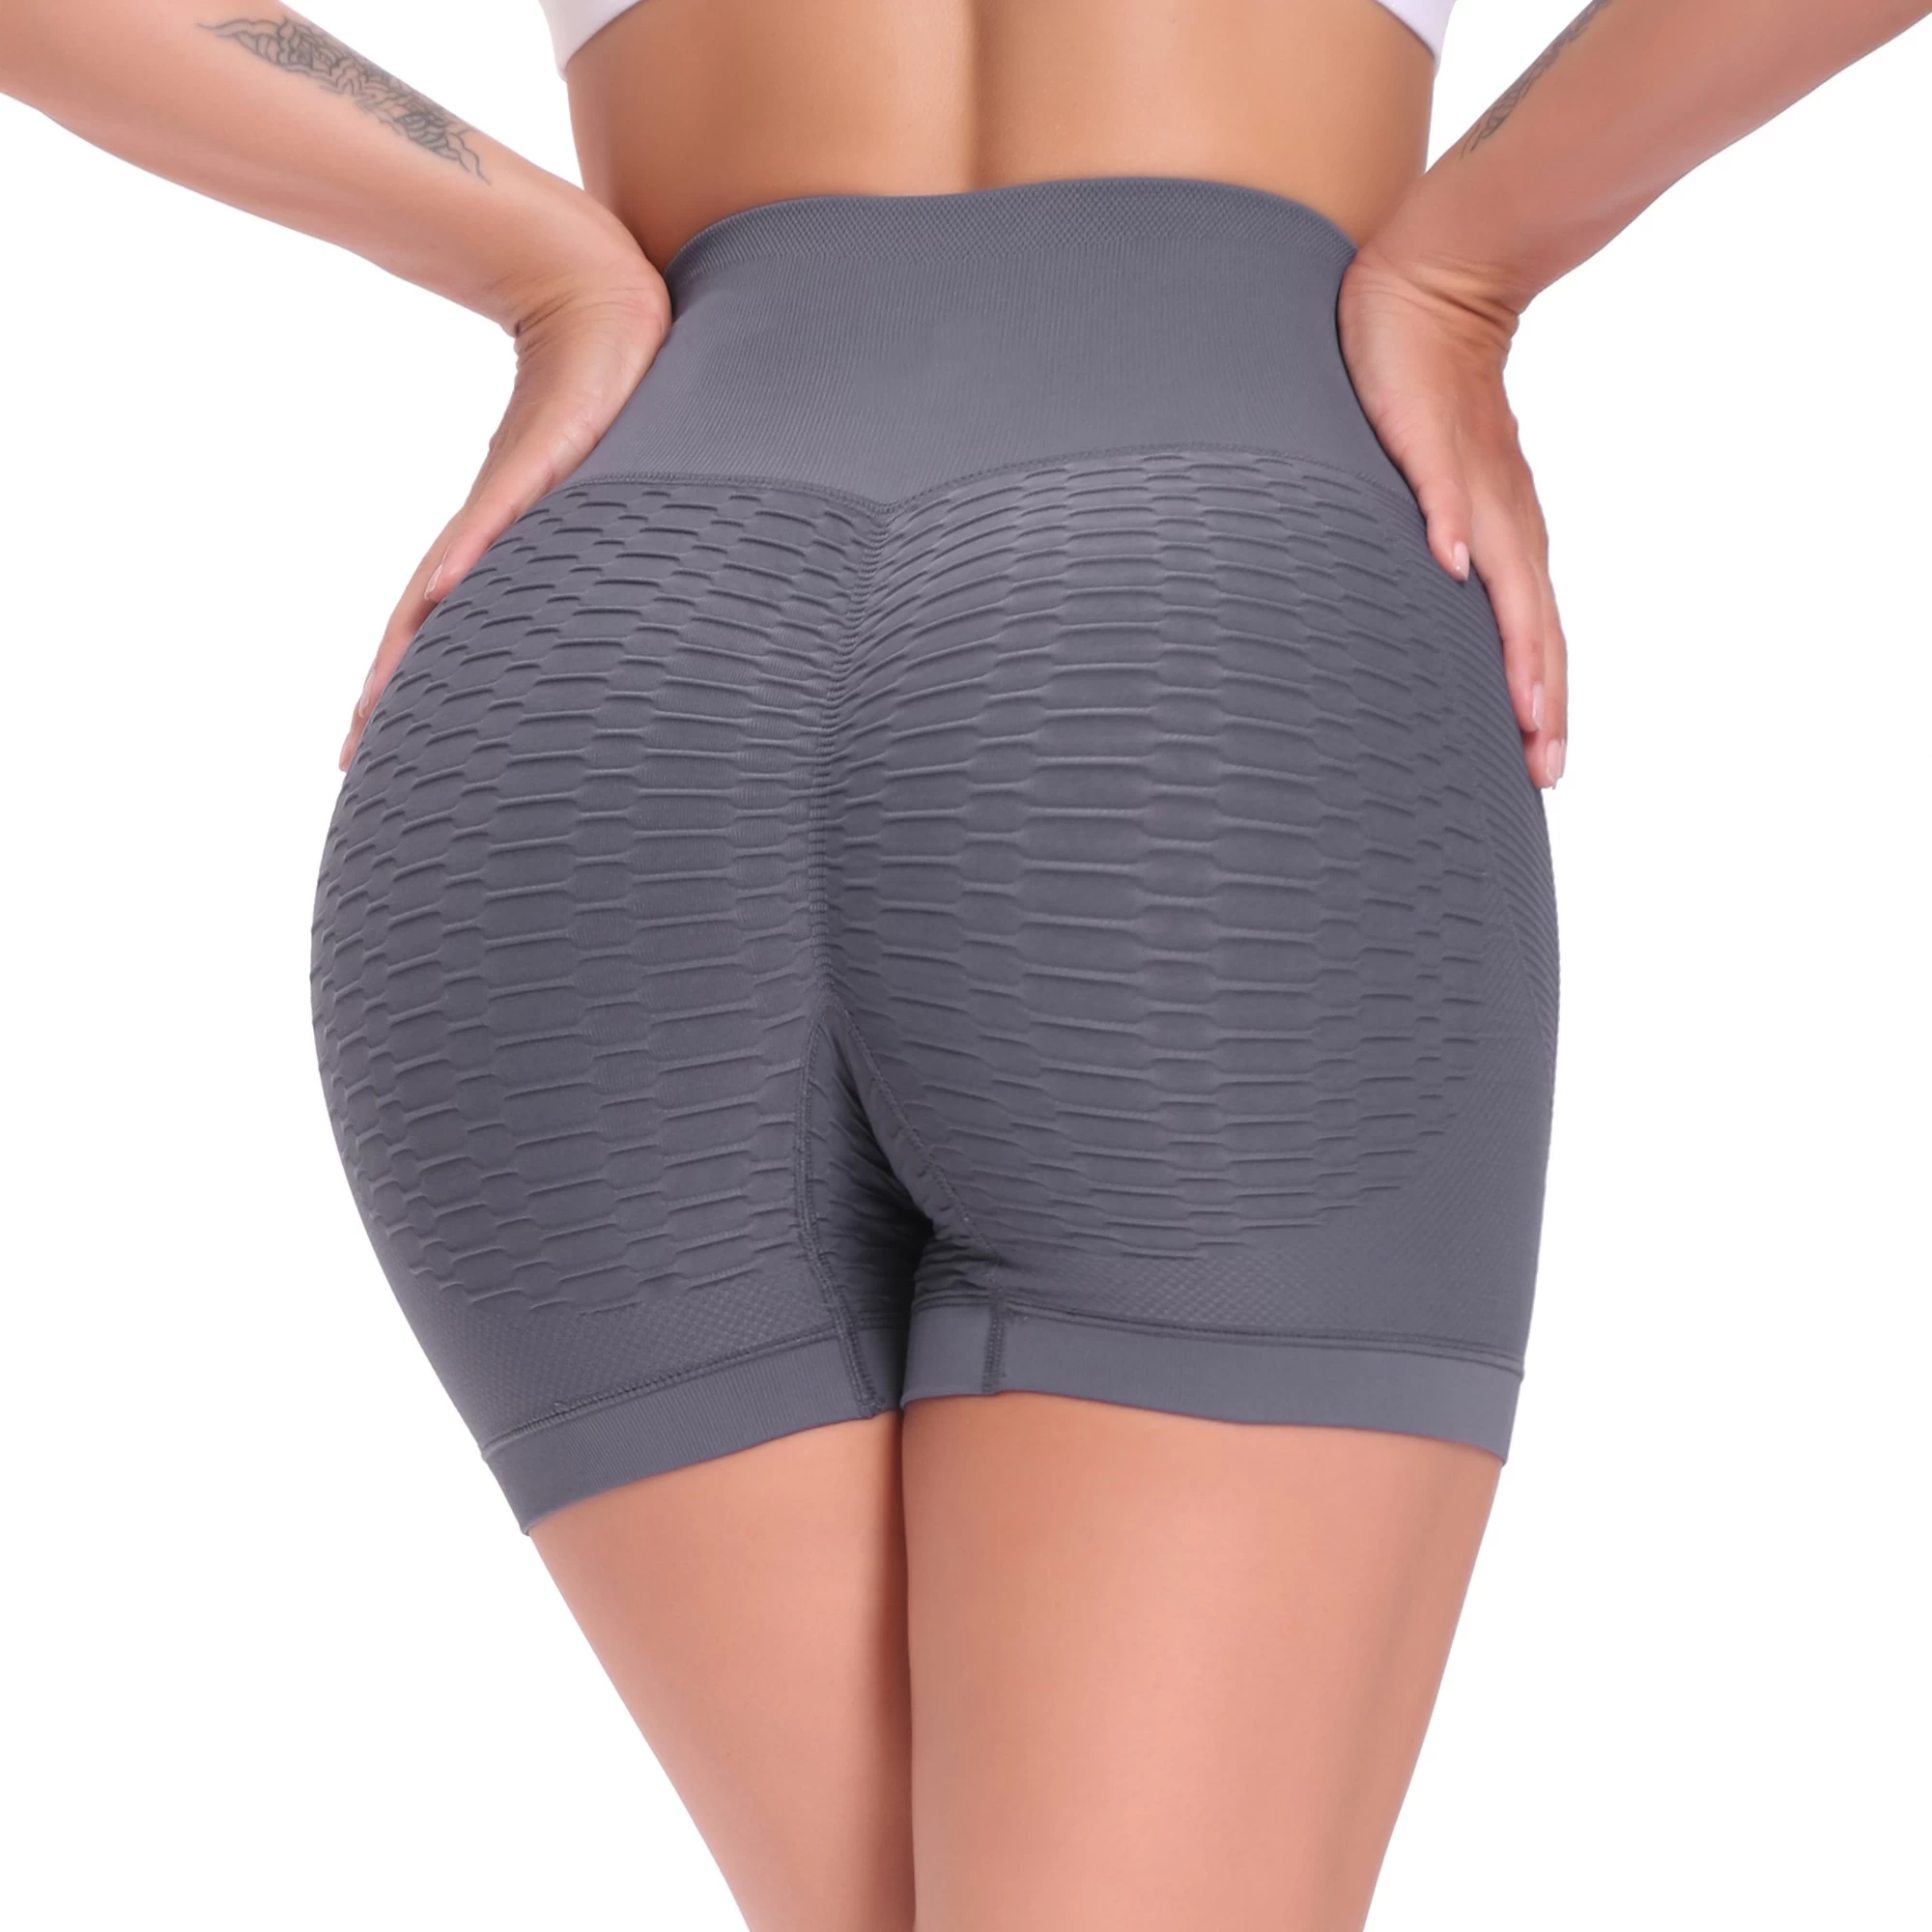 Slim Fit Seamless Sports Fitness Yoga Shorts Manufacturer